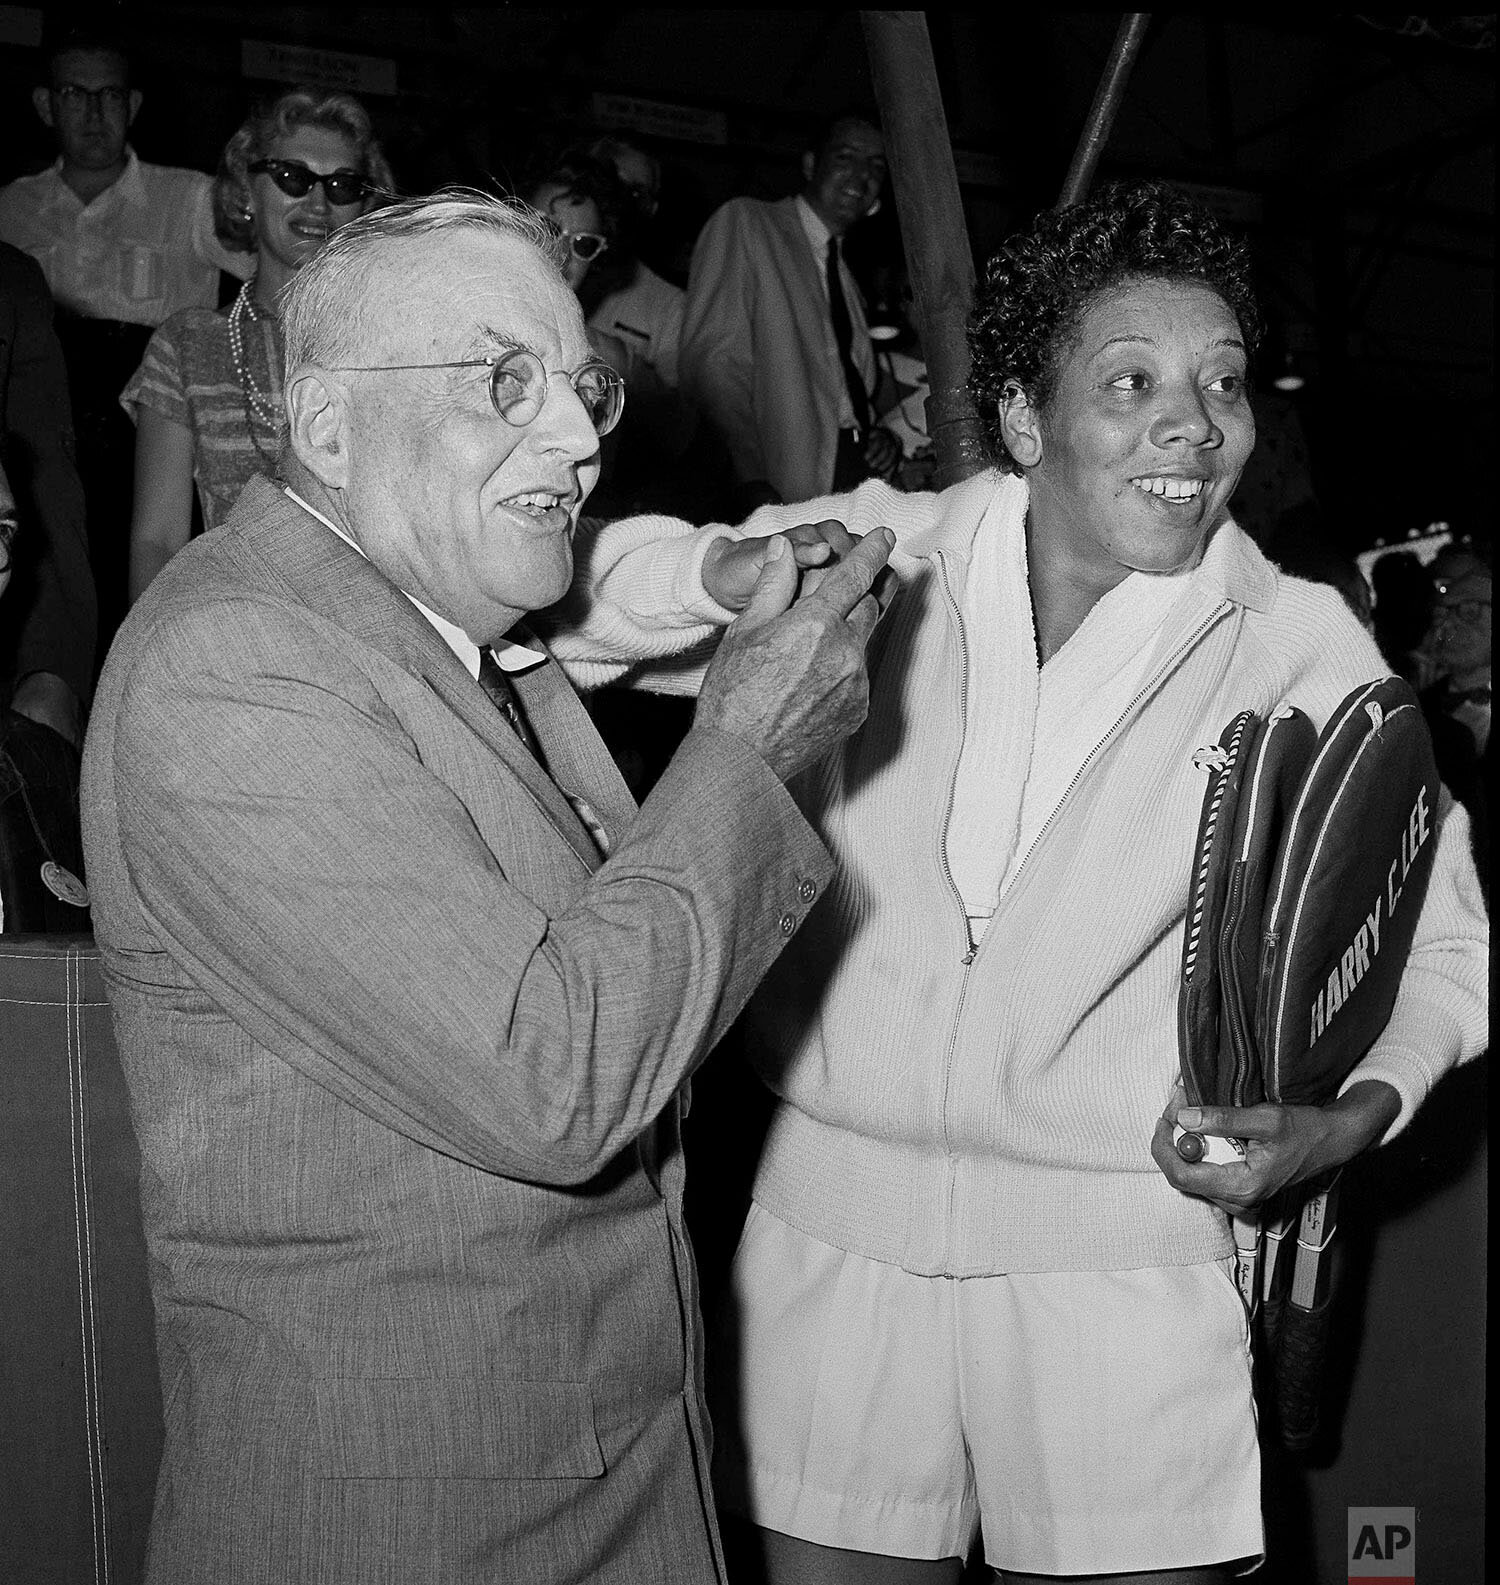  U.S. Secretary of Strate John Foster Dulles and Althea Gibson in stadium of West Side Tennis Club in New York, Sept. 7, 1958. Gibson won the U.S. Championship for the second straight year. Dulles flew in from Washimngton D.C. to make cup presentatio